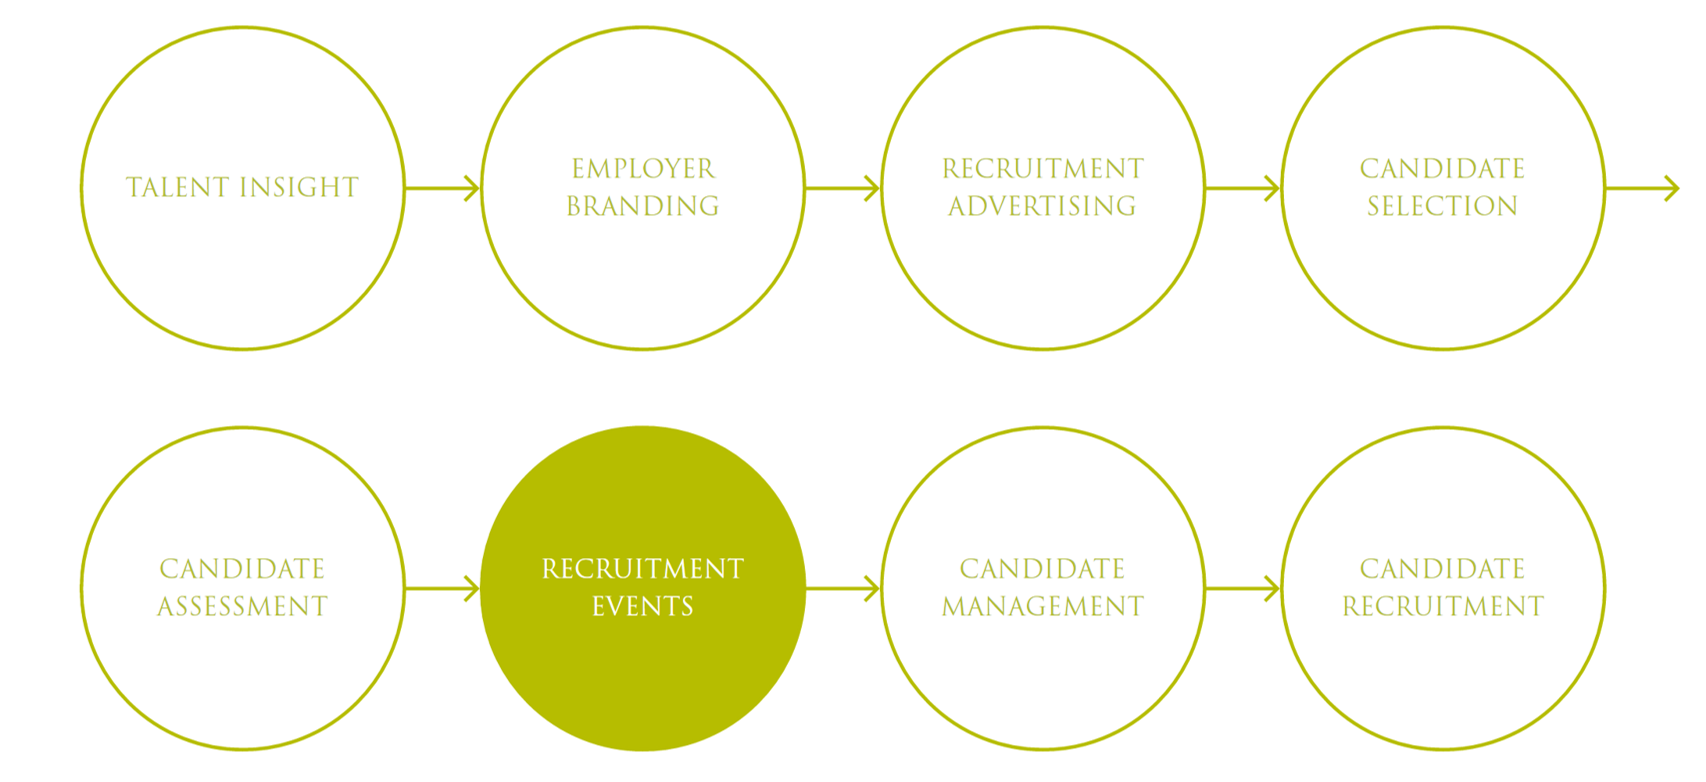 Recruitment Events Jobs in Africa Find work in Africa Careers in